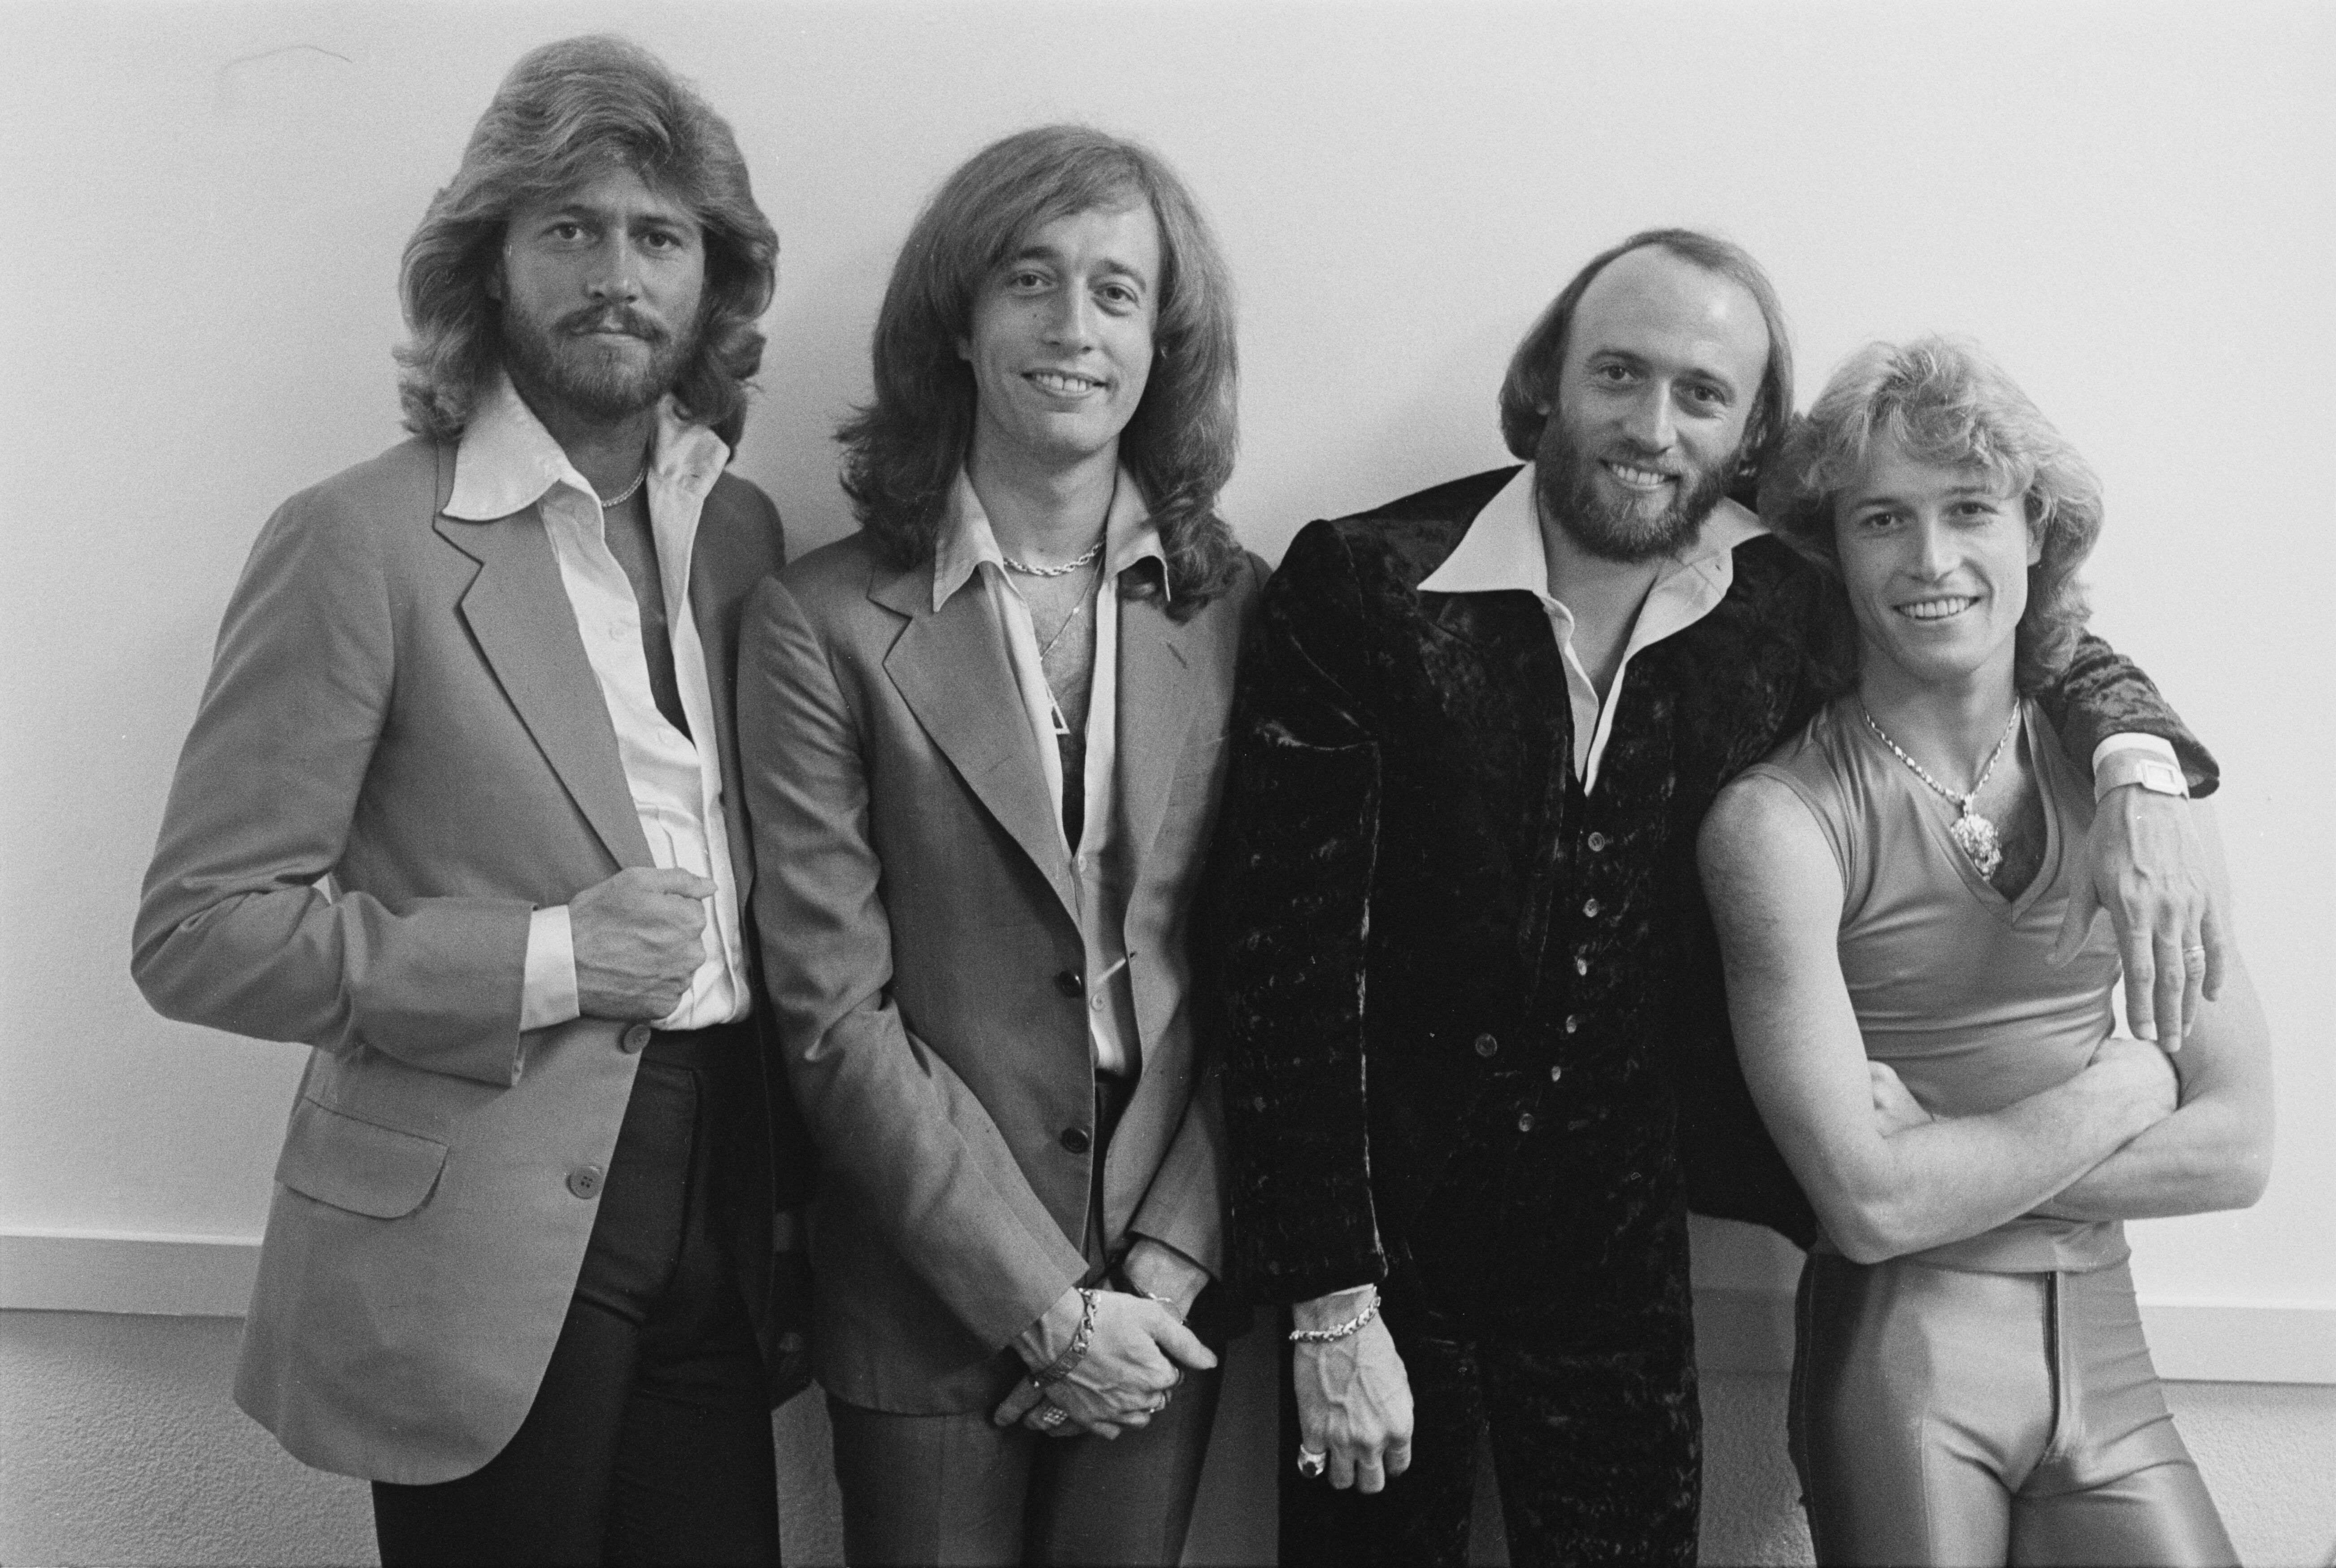 The Bee Gees and their younger brother Andy Gibb at the NARM convention and award ceremony at the Diplomat Hotel in Hollywood, Florida, March 1979. | Source: Getty Images